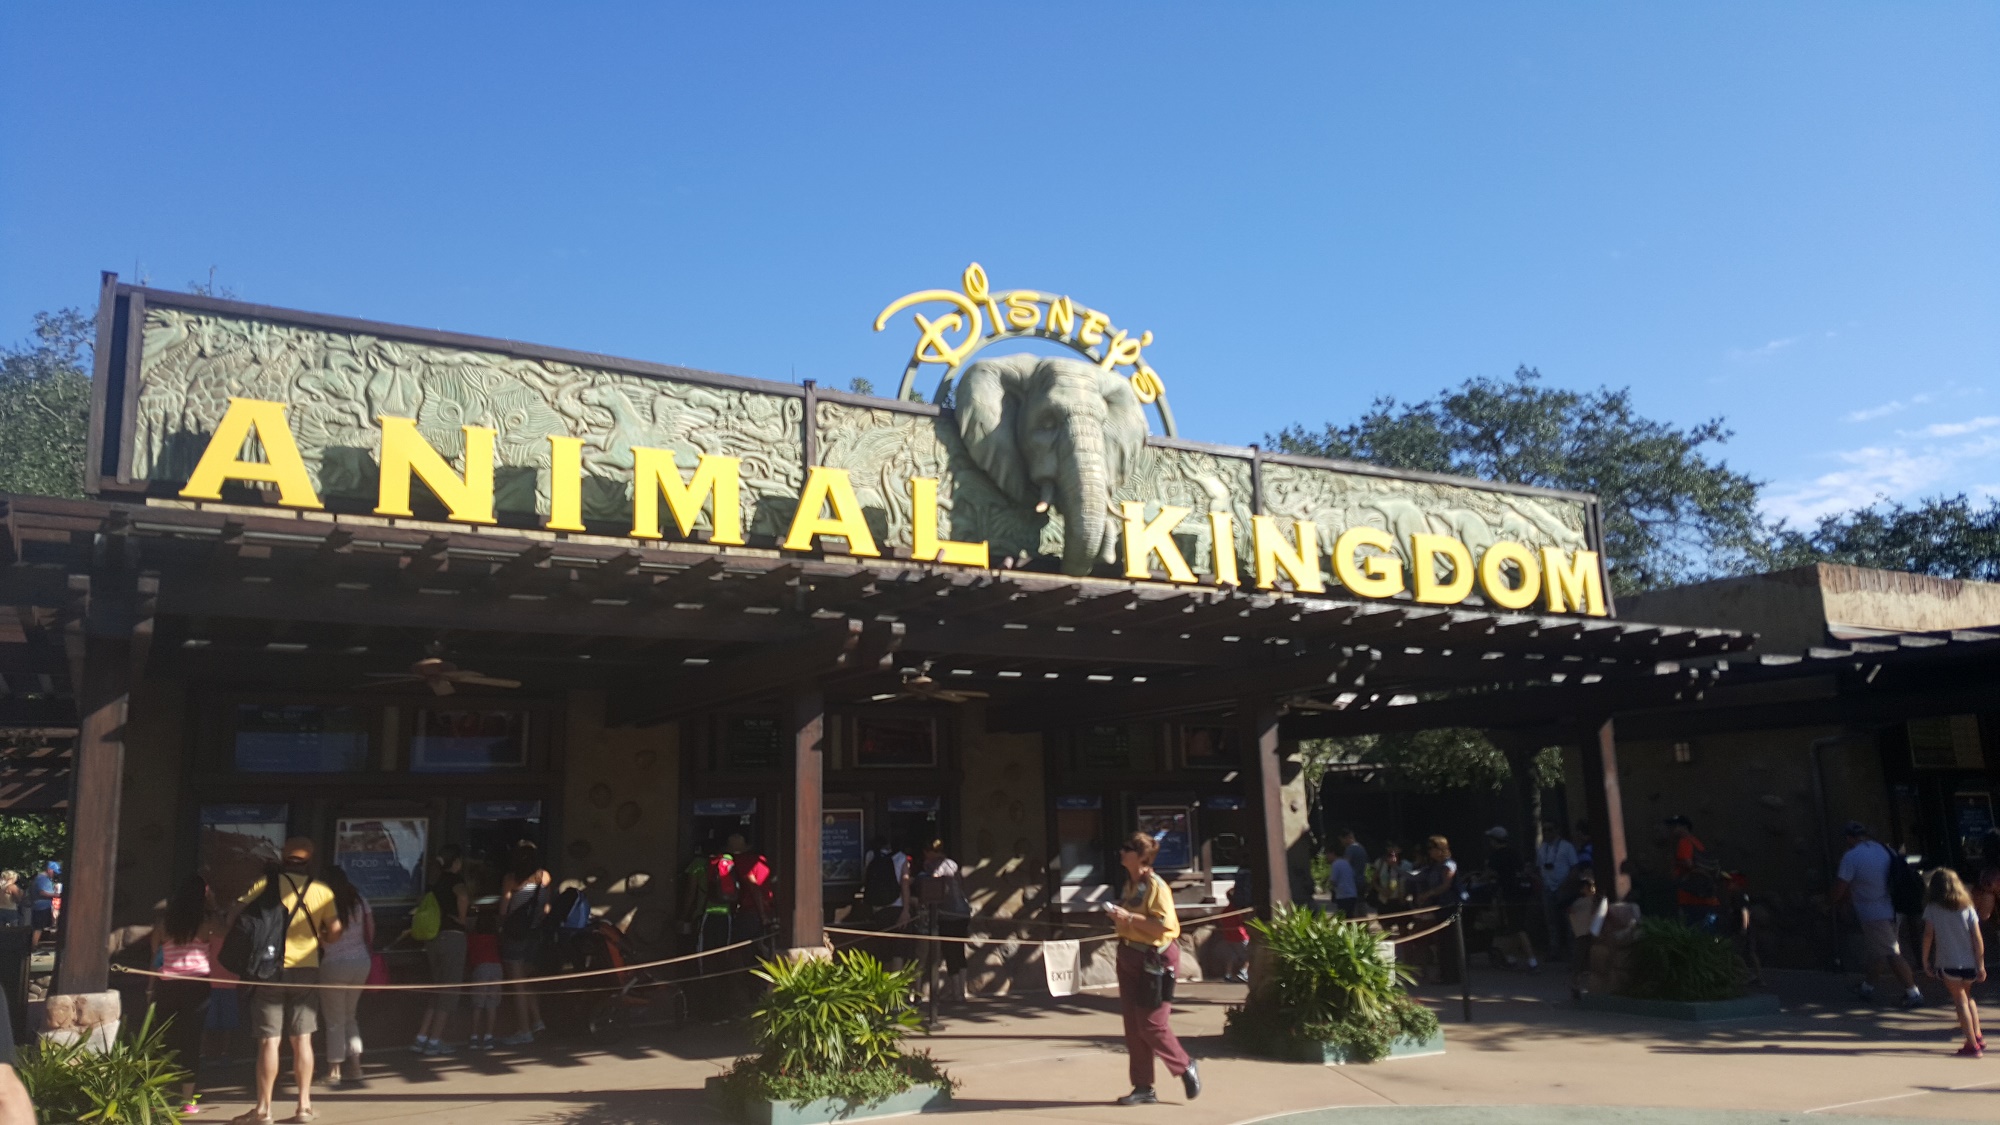 Guest Apprehended trying to Bring Firearm into Disney’s Animal Kingdom